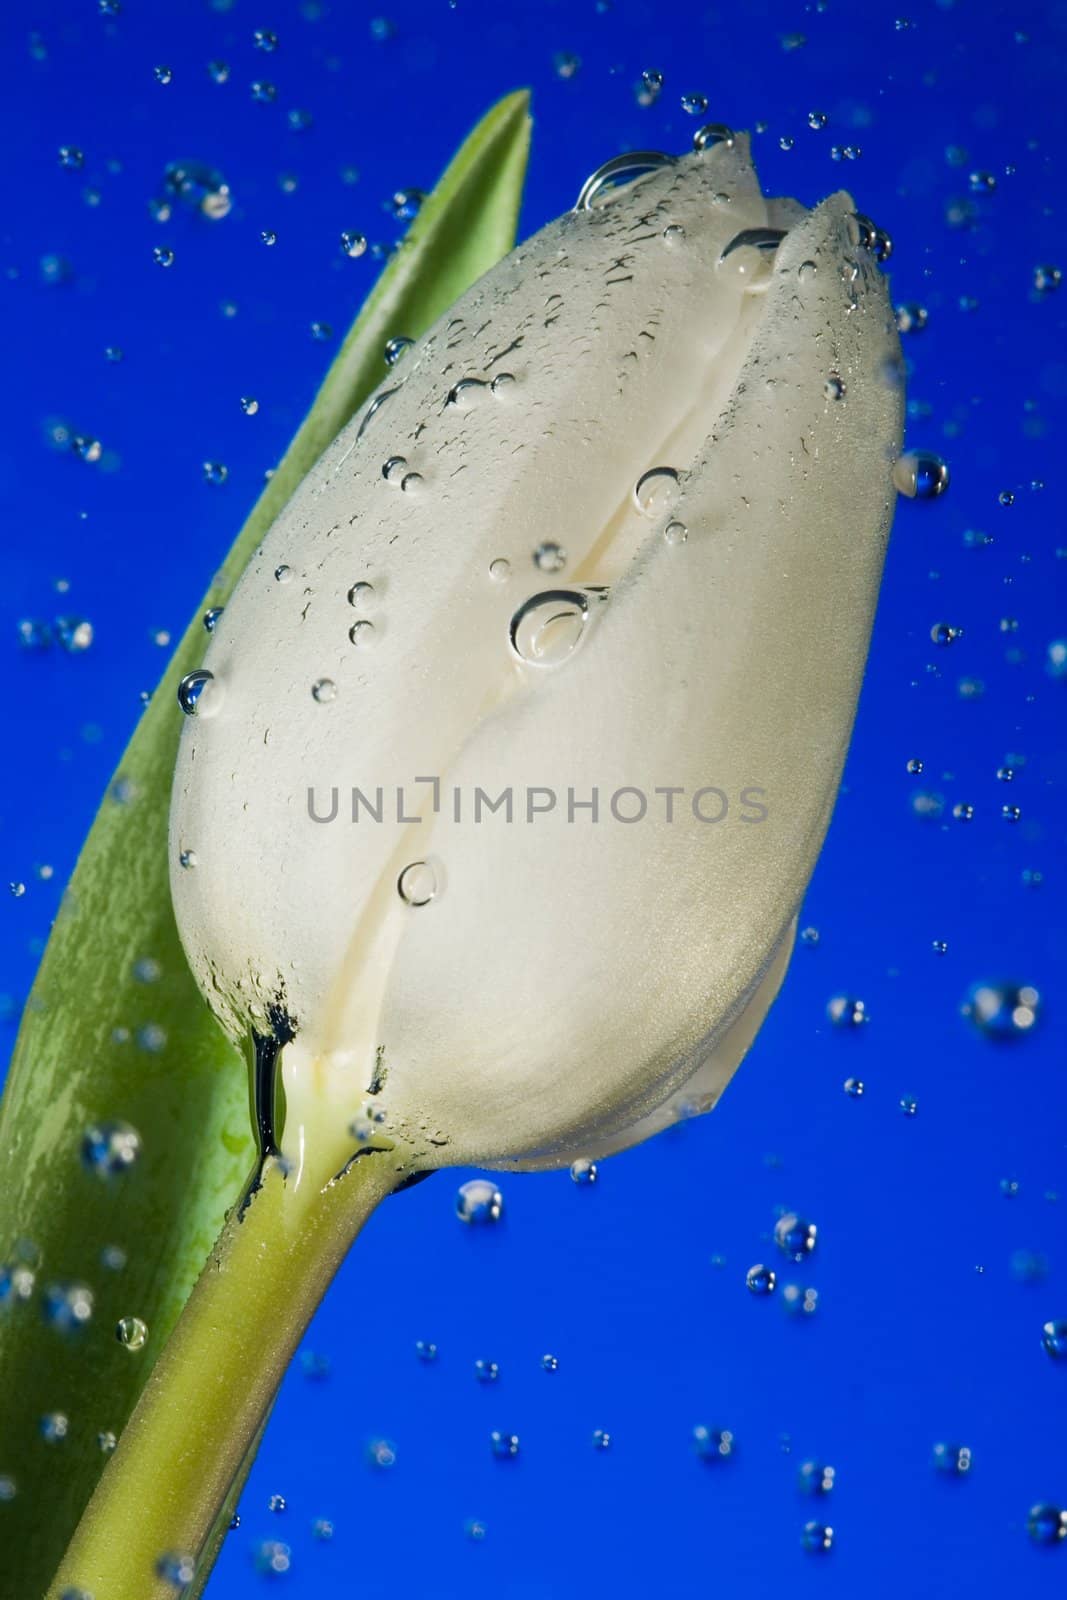 White tulip in water on a dark blue background in an environment of vials of air
